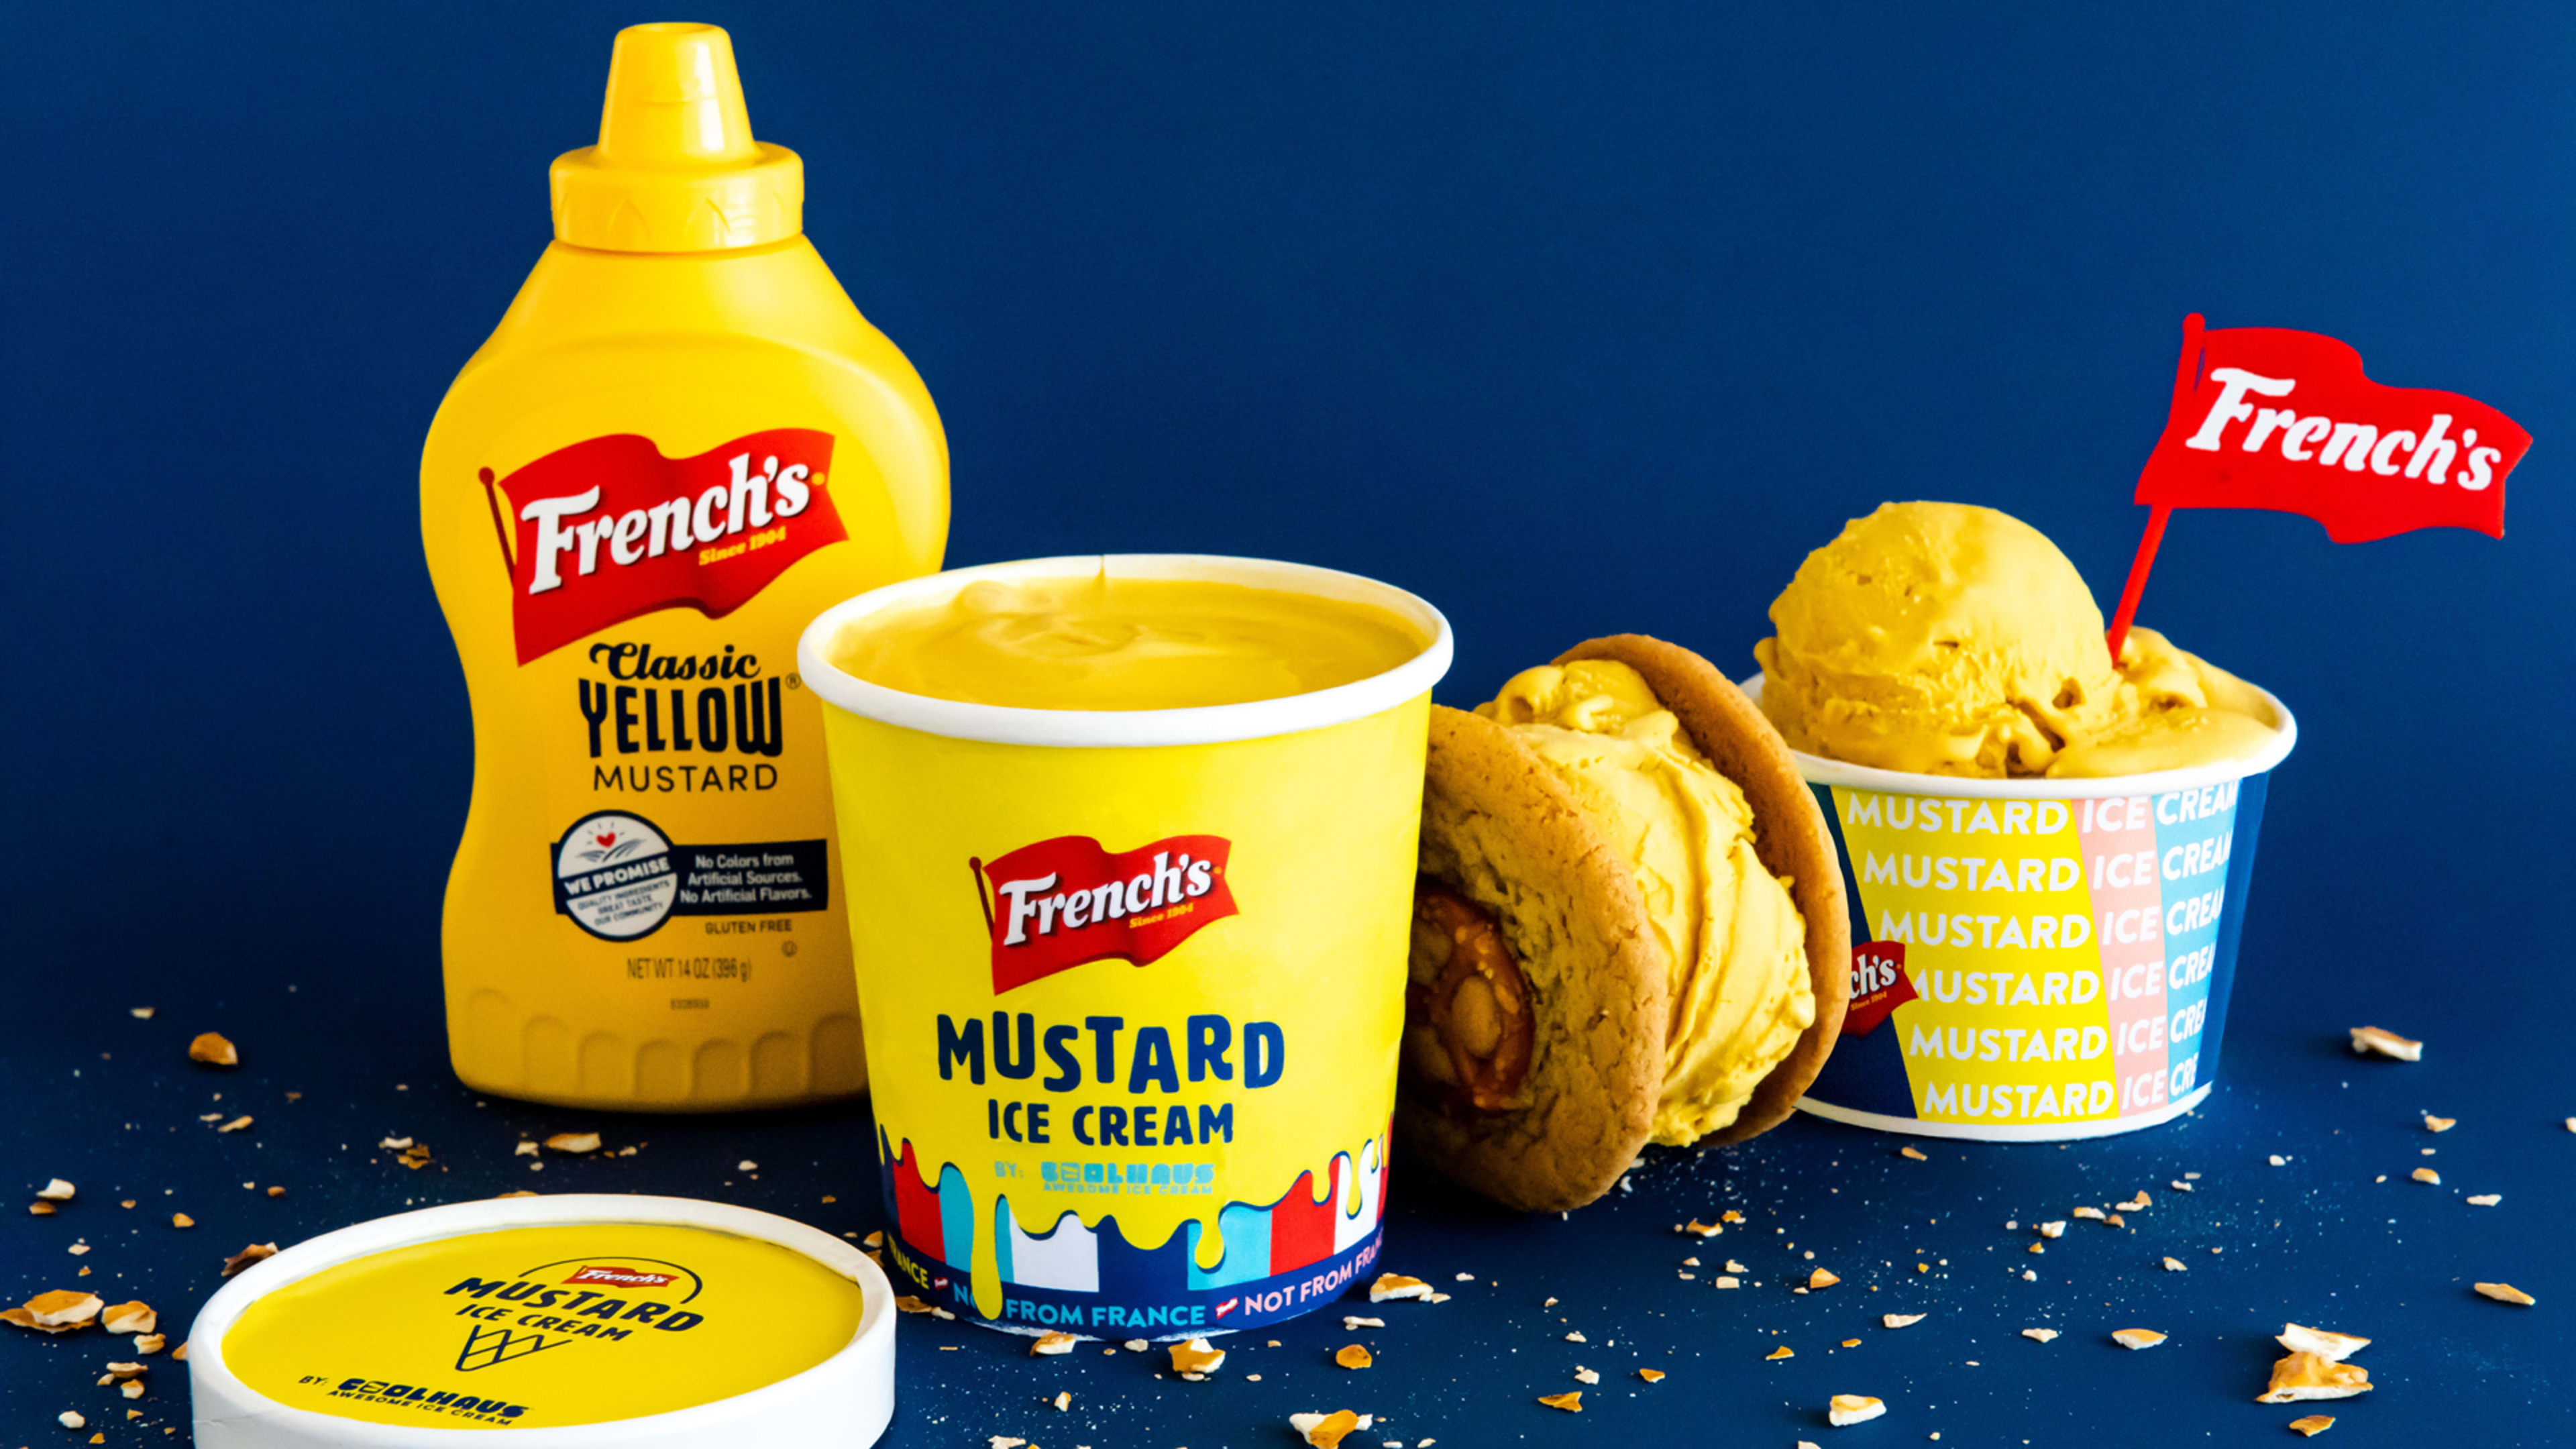 French’s mustard ice cream has met its match with Oscar Mayer’s Ice Dog